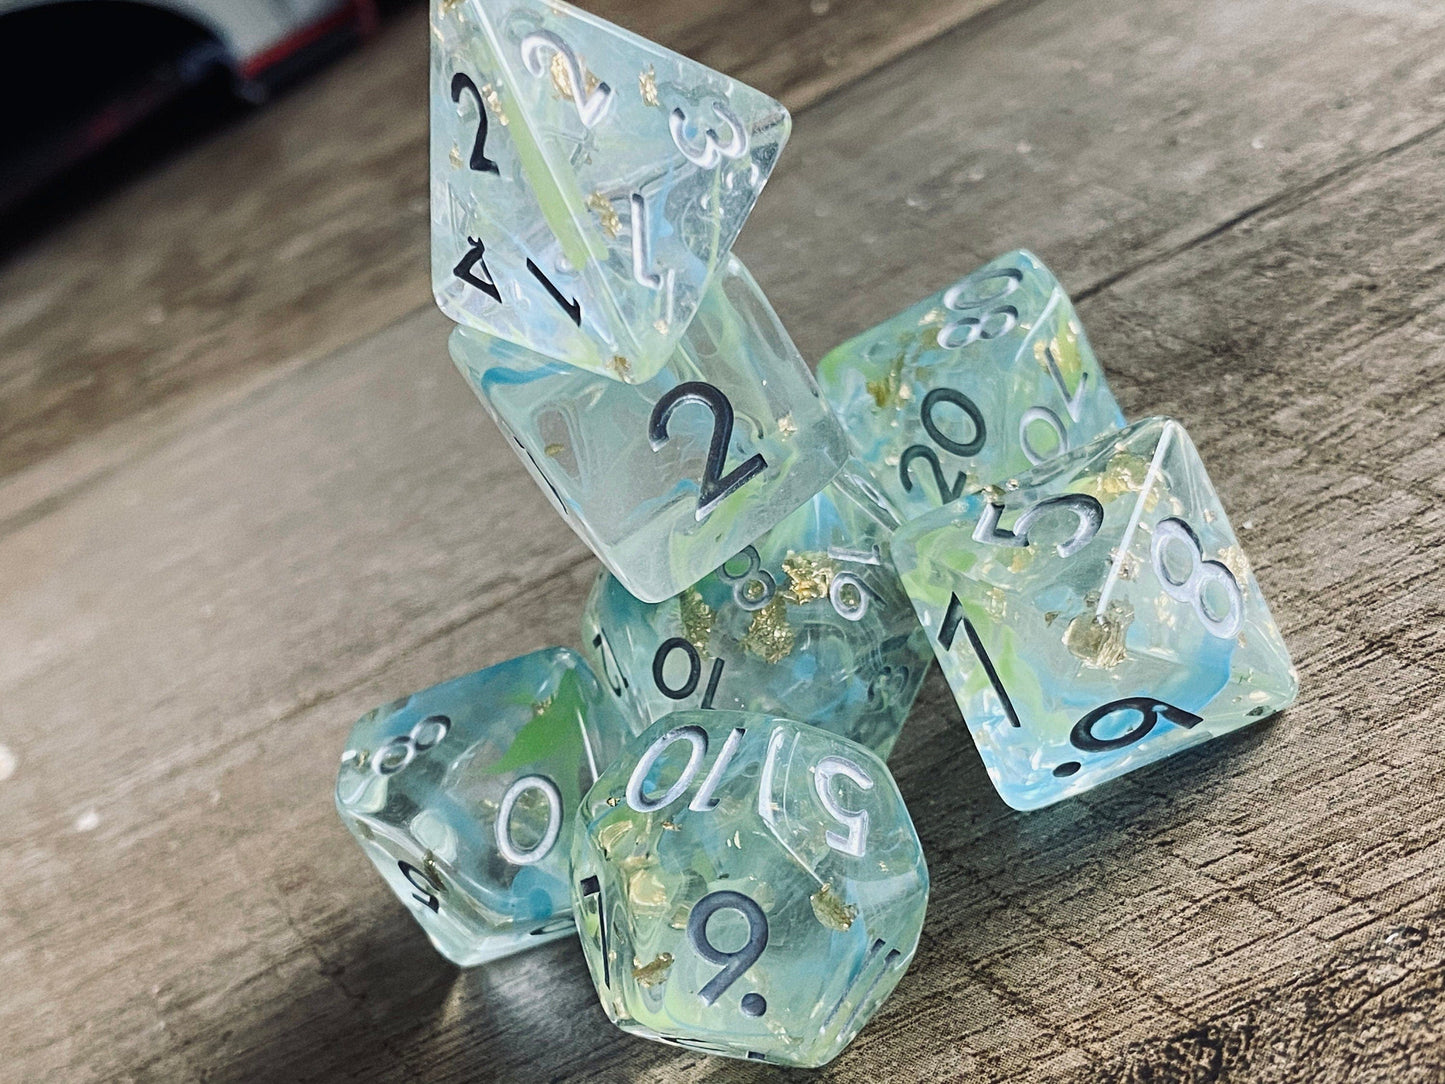 The Crooked Tavern Dice Sets Flotsam RPG Dice Set | Swirling Aqua Colors with Gold Flakes Inside!